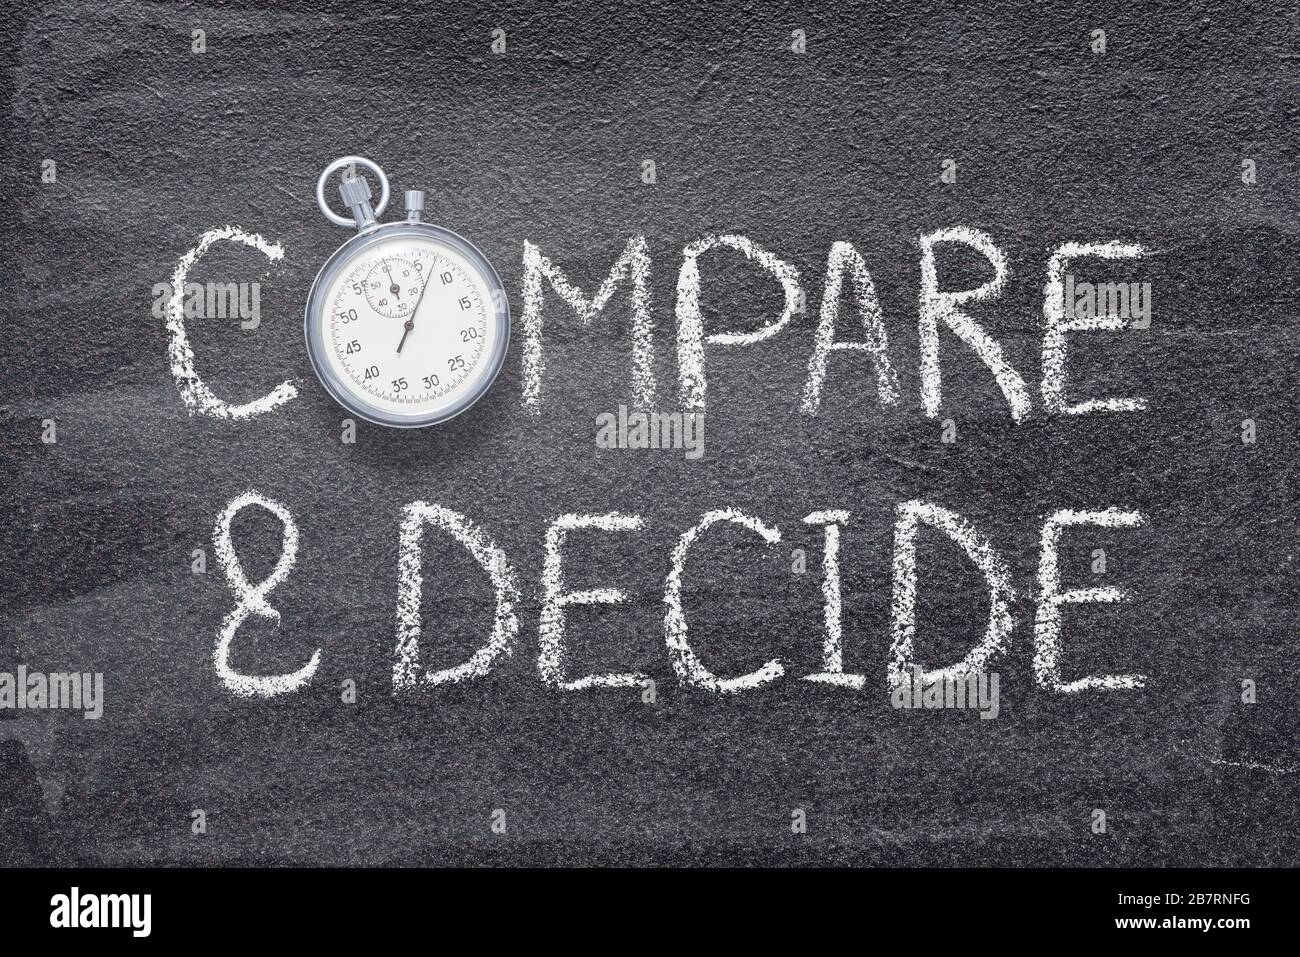 compare and decide phrase written on chalkboard with vintage precise stopwatch Stock Photo